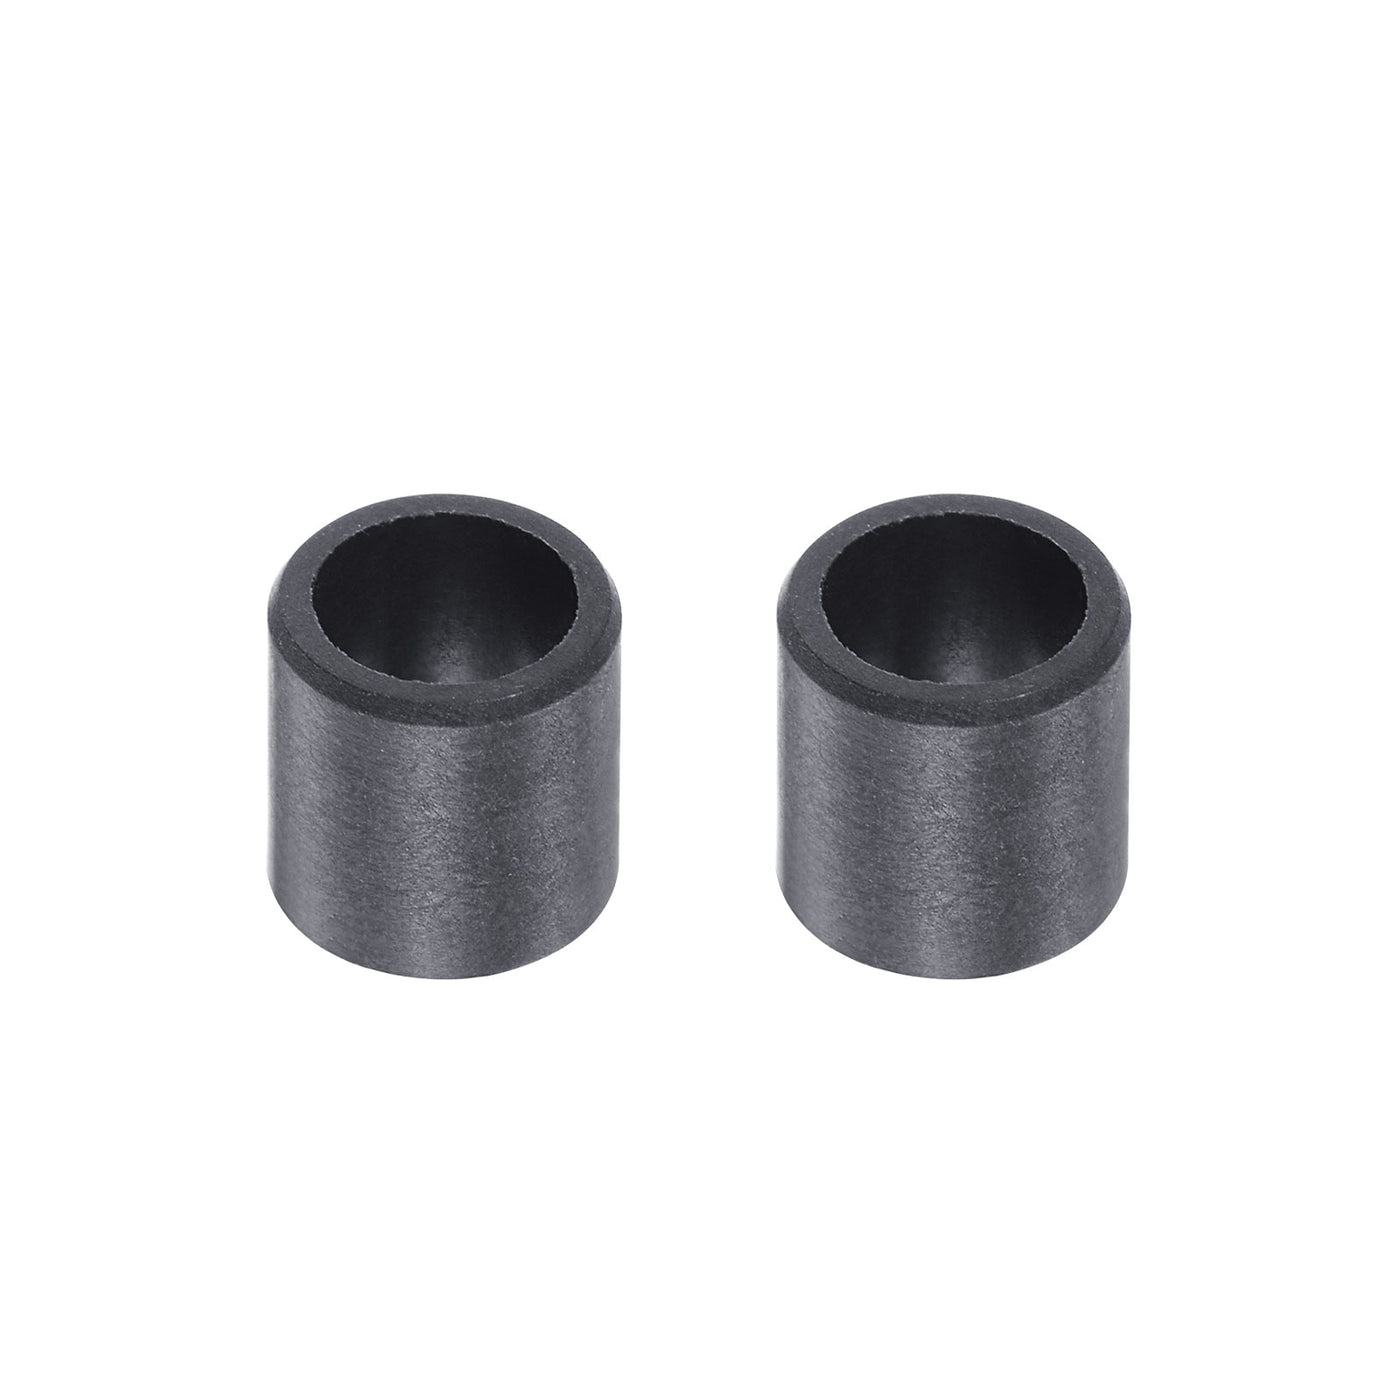 uxcell Uxcell Sleeve Bearings 6mmx8mmx8mm POM Wrapped Oilless Bushings Black 2pcs